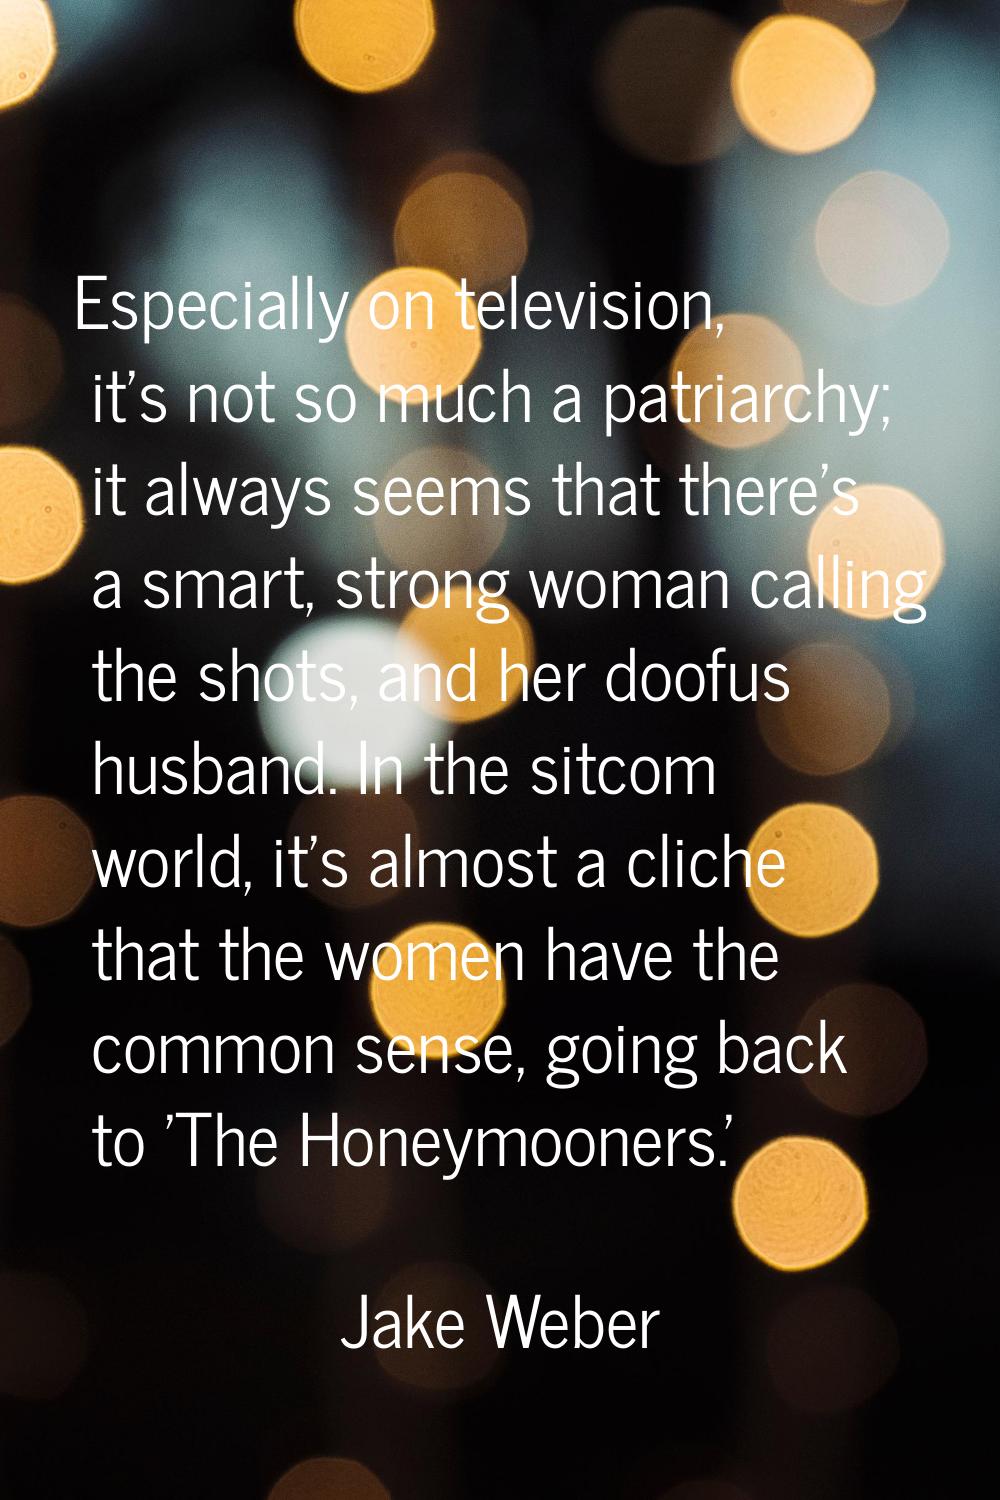 Especially on television, it's not so much a patriarchy; it always seems that there's a smart, stro